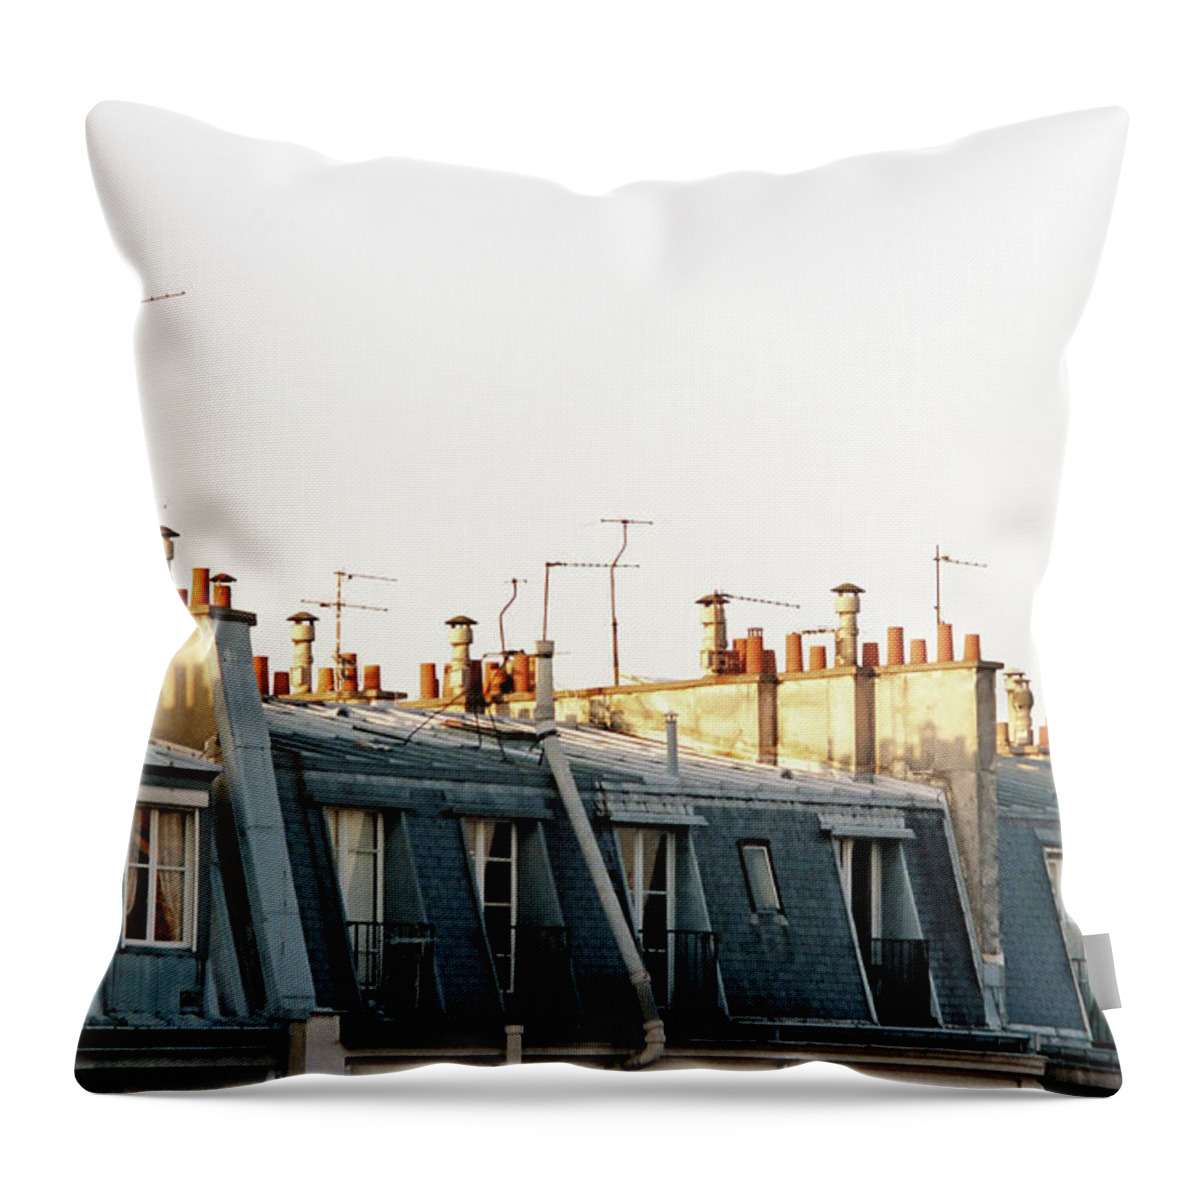 Rooftops Throw Pillow featuring the photograph Paris Rooftops by Frank DiMarco